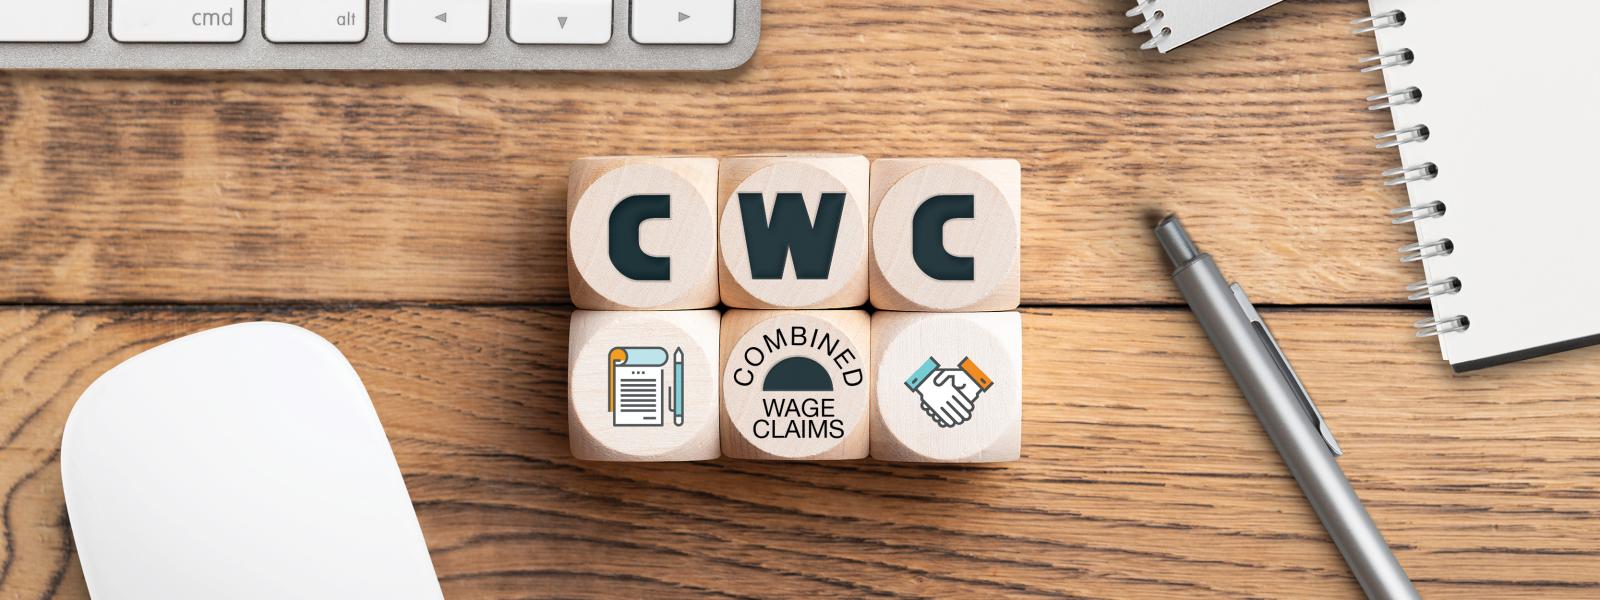 image of six six-sided blocks with the acronym CWC for Combined Wage Claims